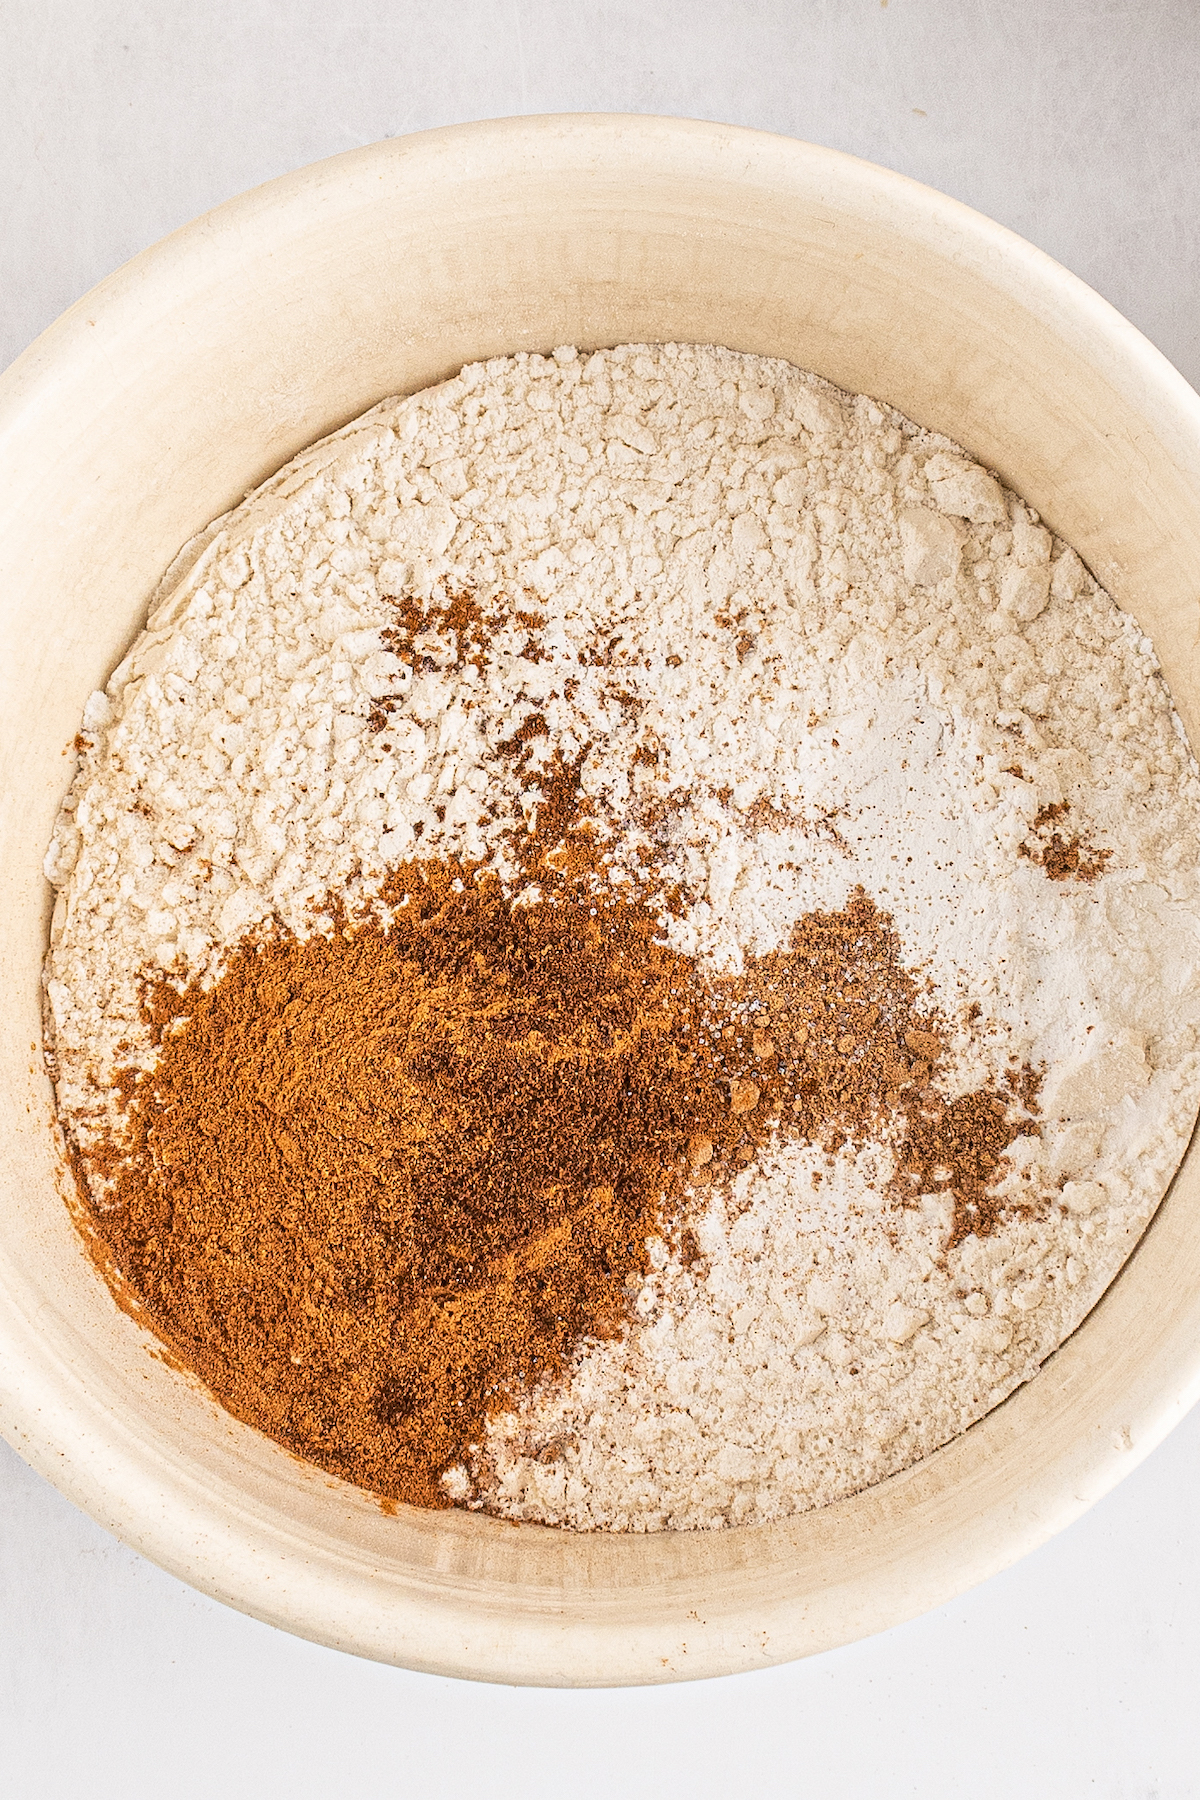 Dry baking ingredients in a mixing bowl.